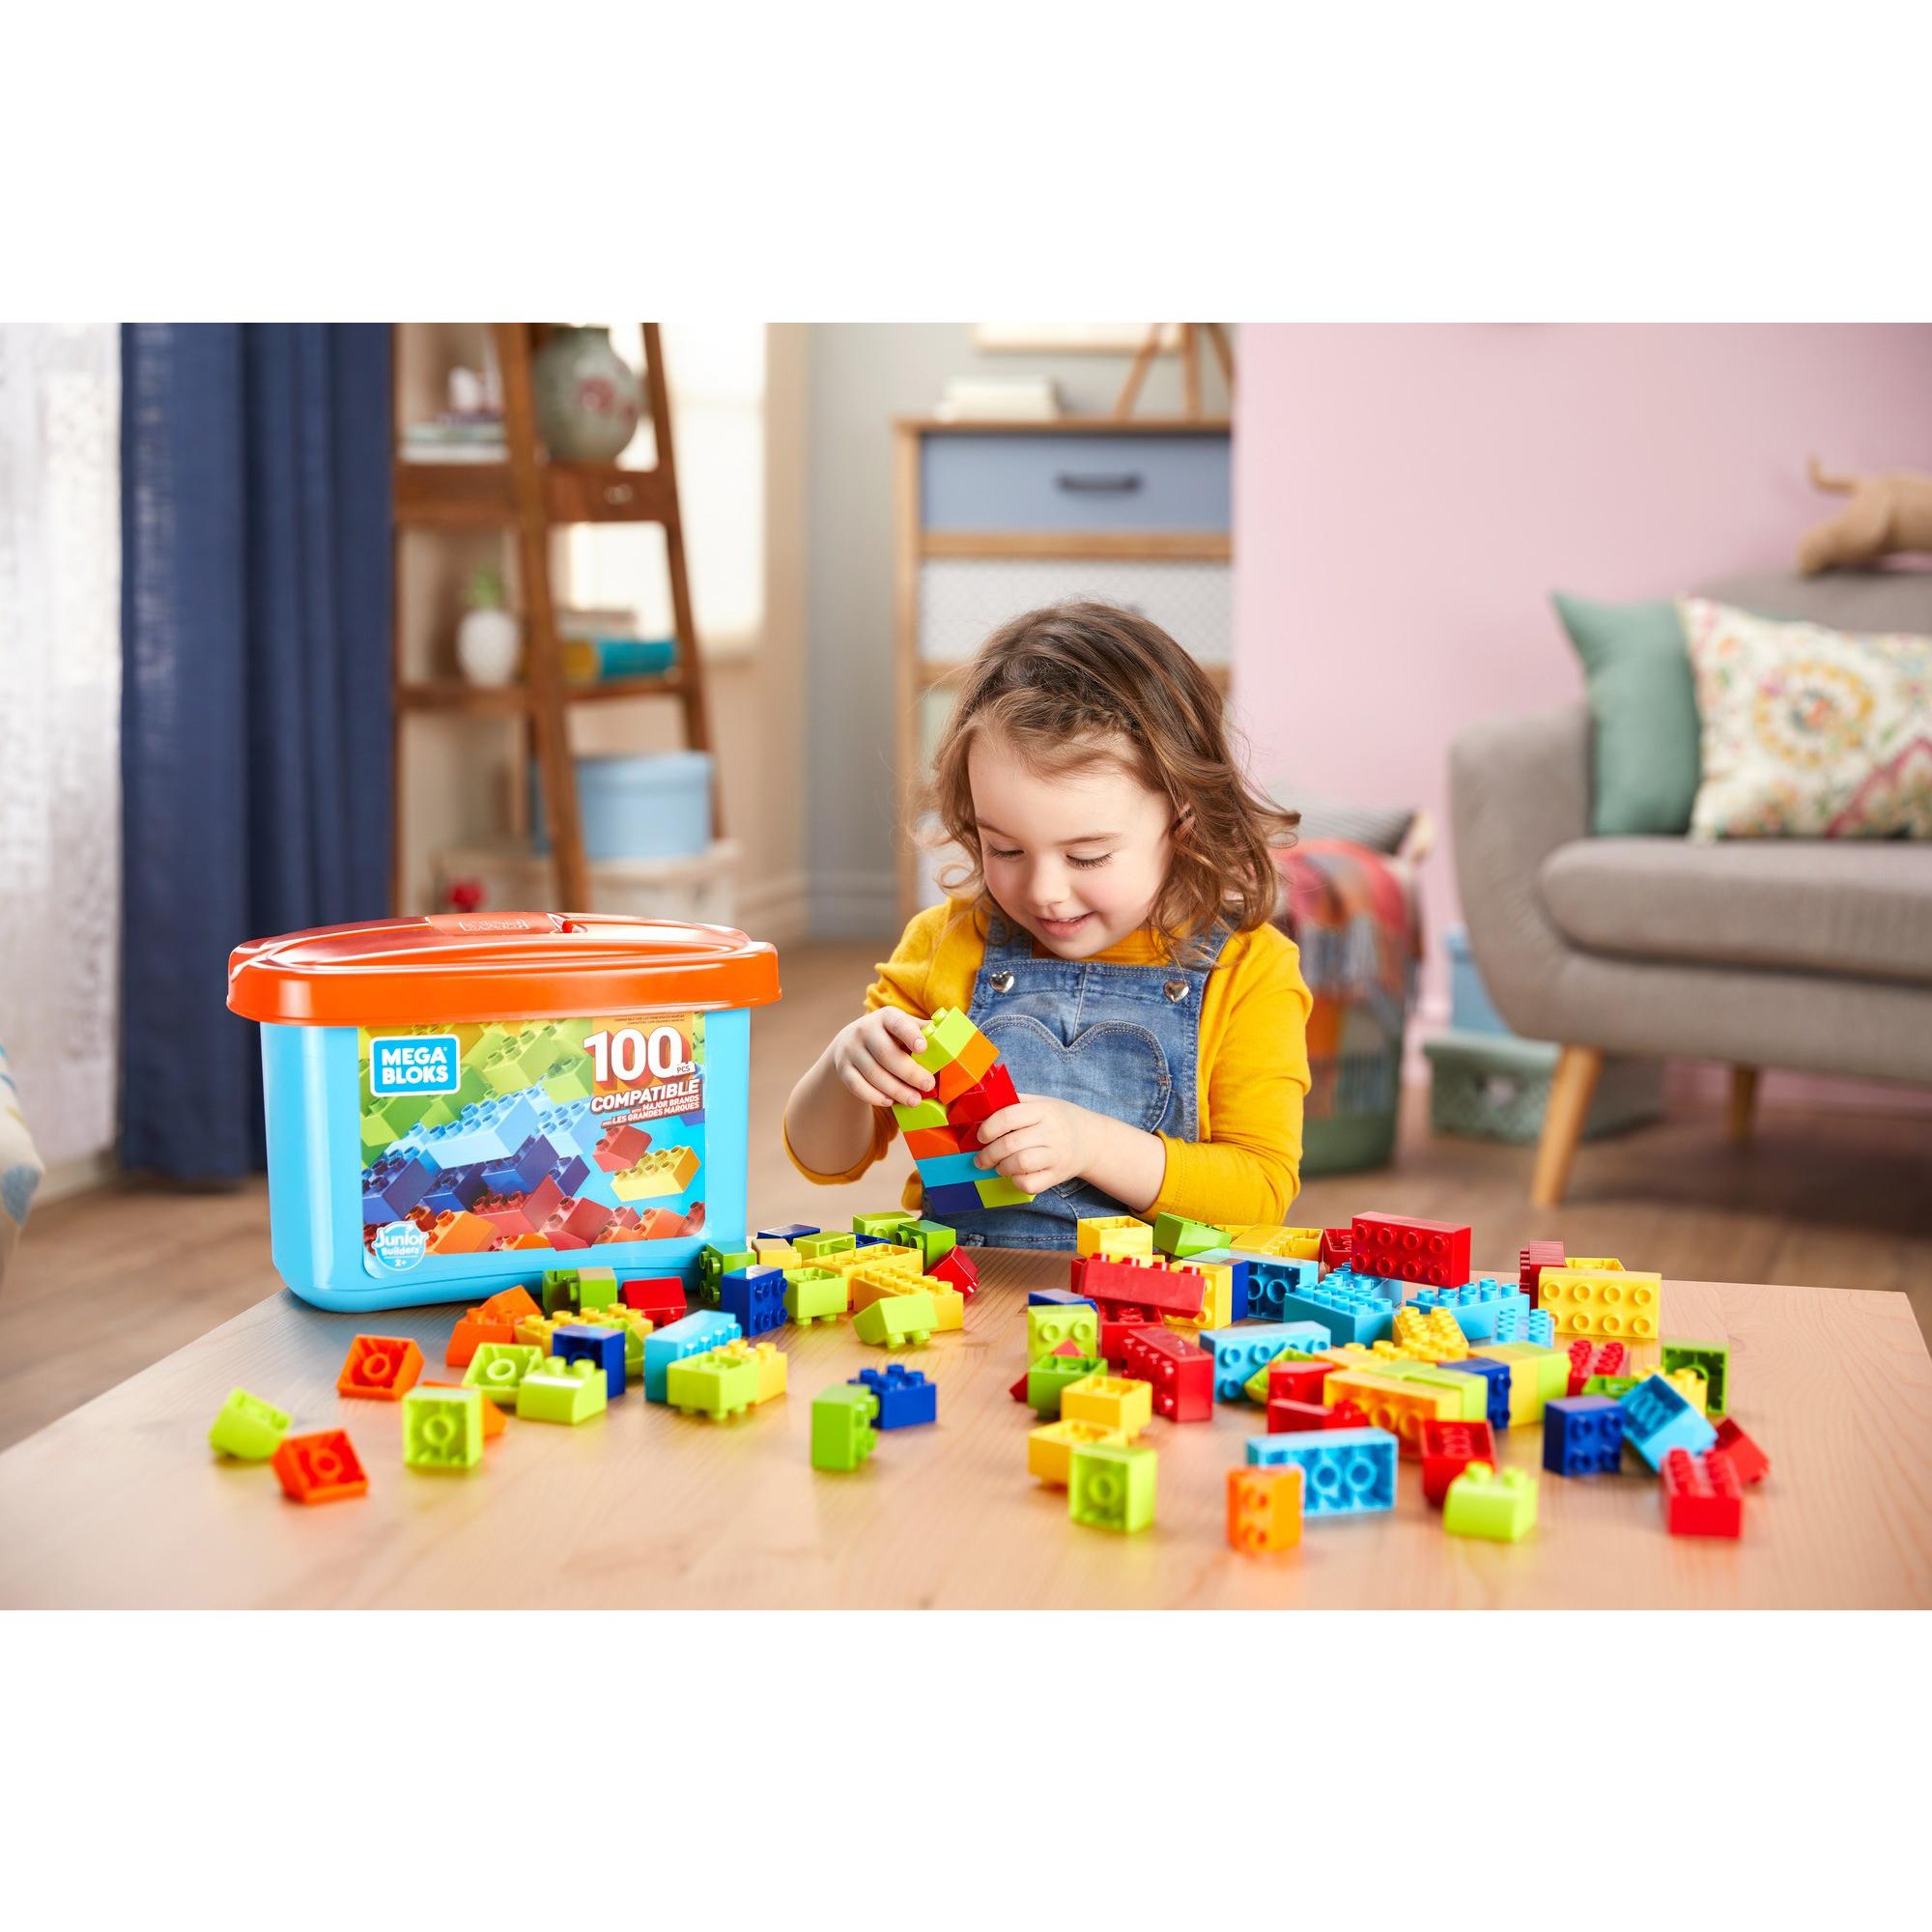 Mega Bloks Junior Builders 100-pc Building Tub with Building Blocks, Building Toys for Toddlers (100 Pieces) - image 3 of 7